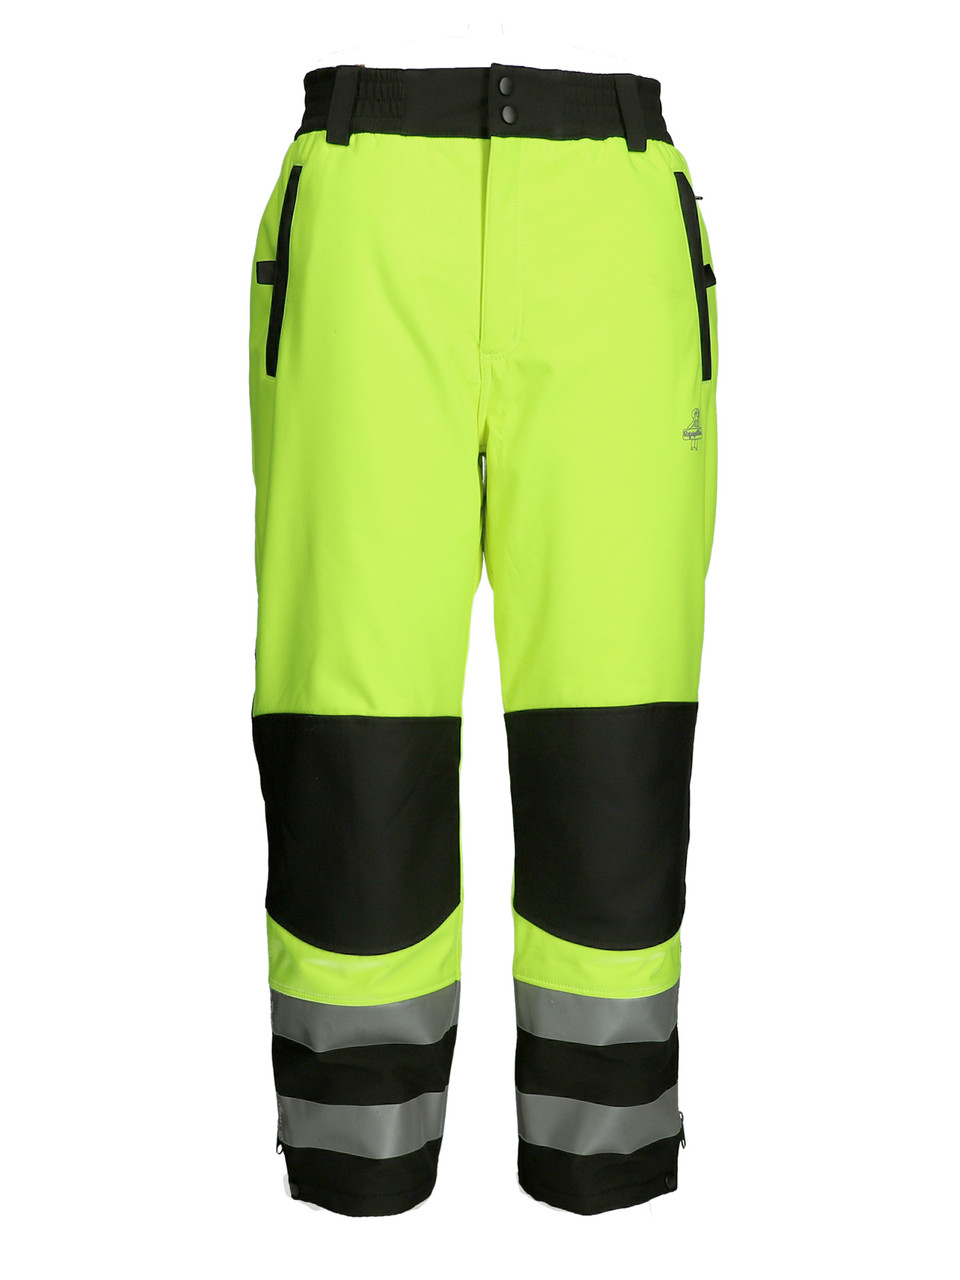 LINES specialist pants unisex XL extra large